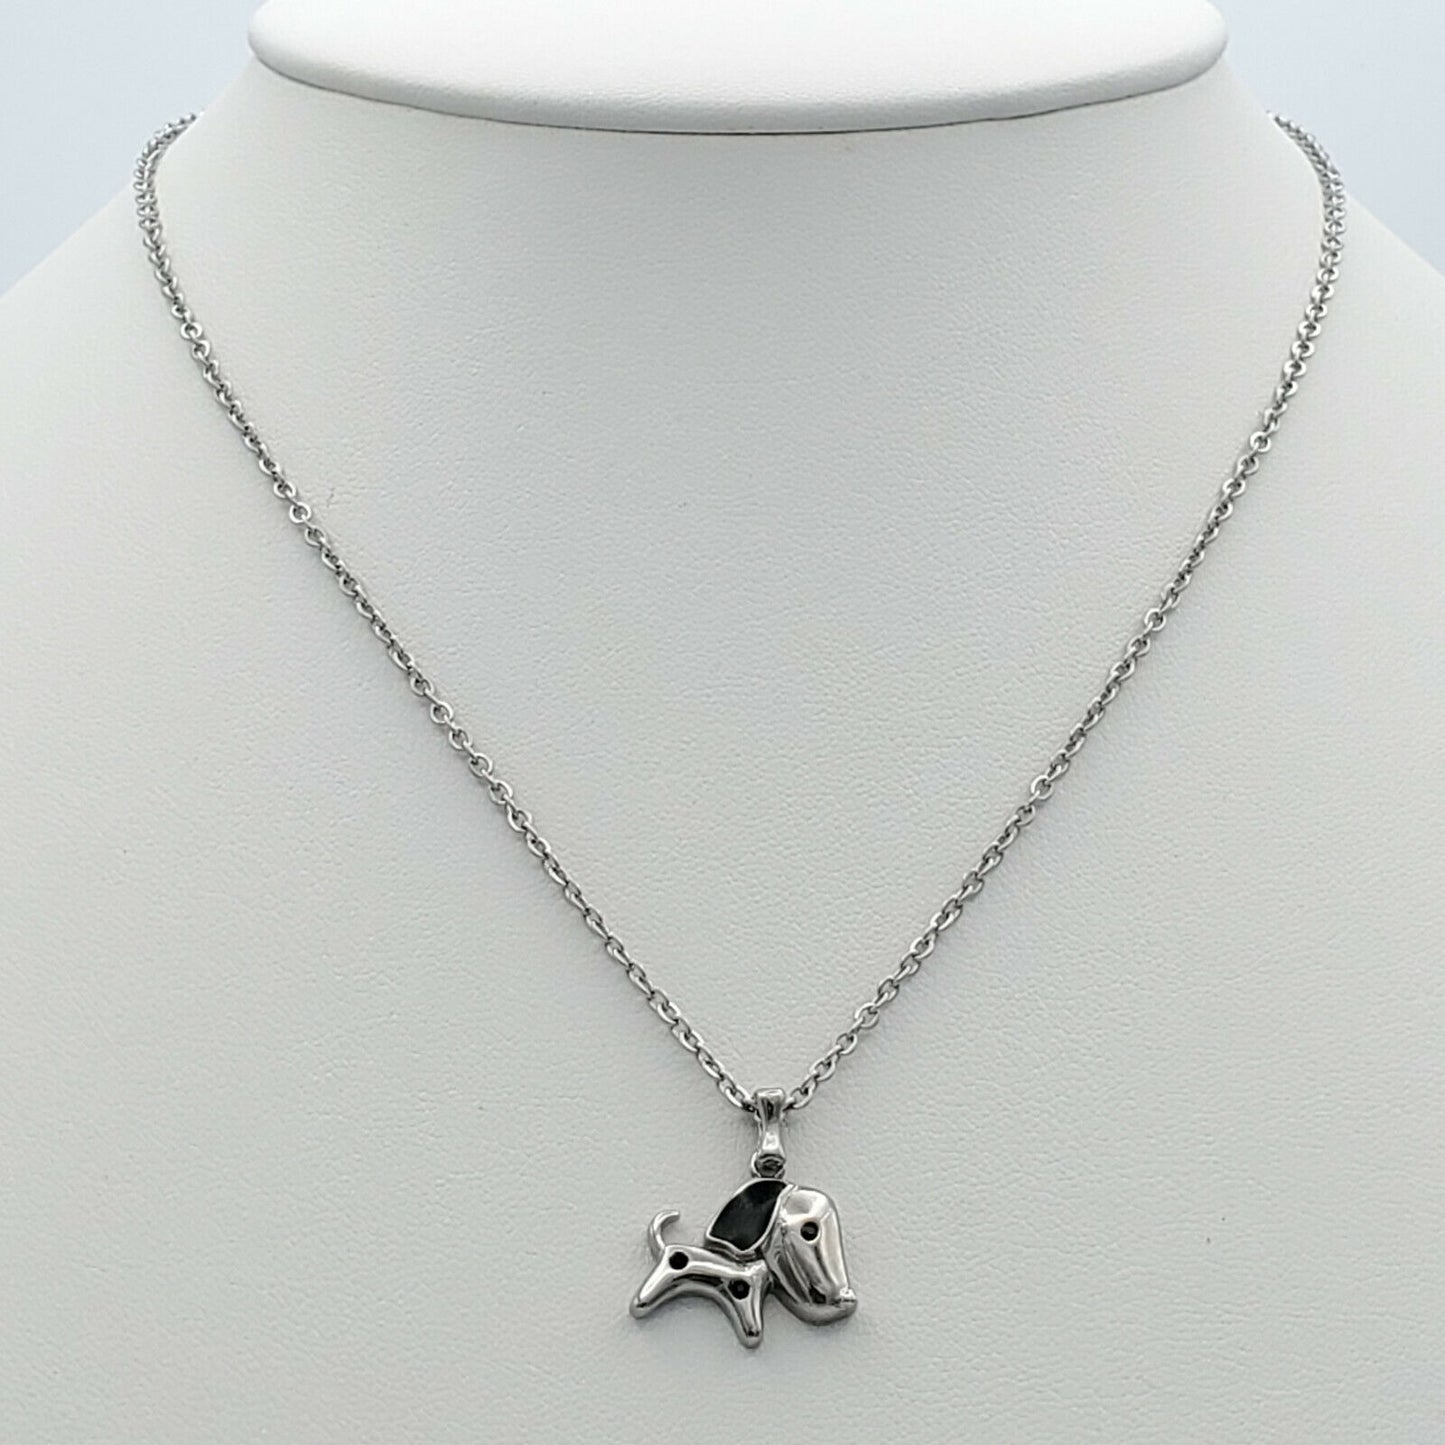 Necklaces - Stainless Steel. Dog Pendant & Chain - Animal Lover